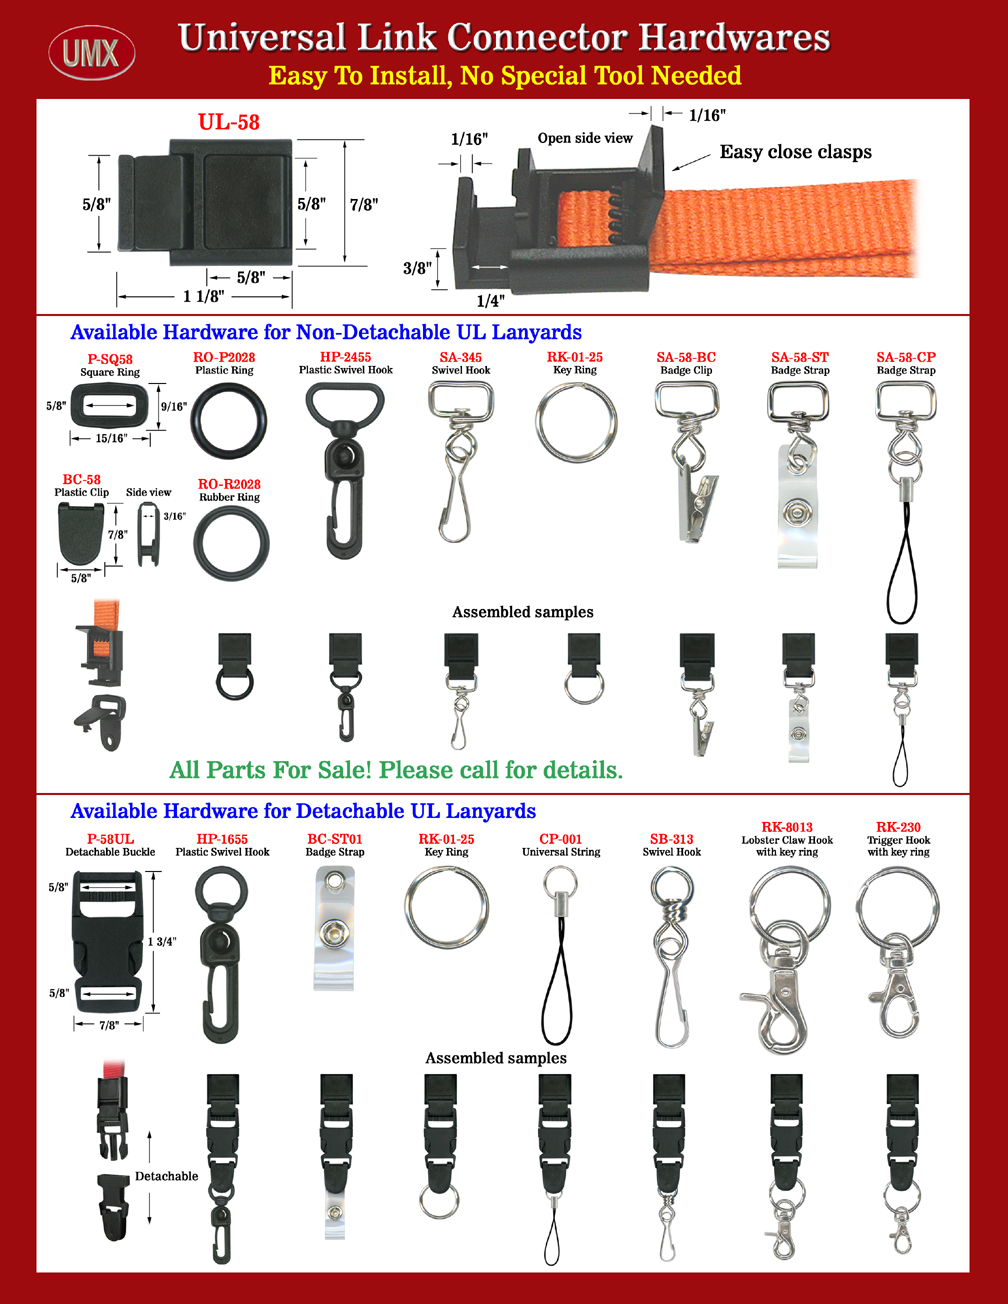 5/8" Universal Link Lanyard Connector: Made Of Heavy Duty ABS Plastic Material .